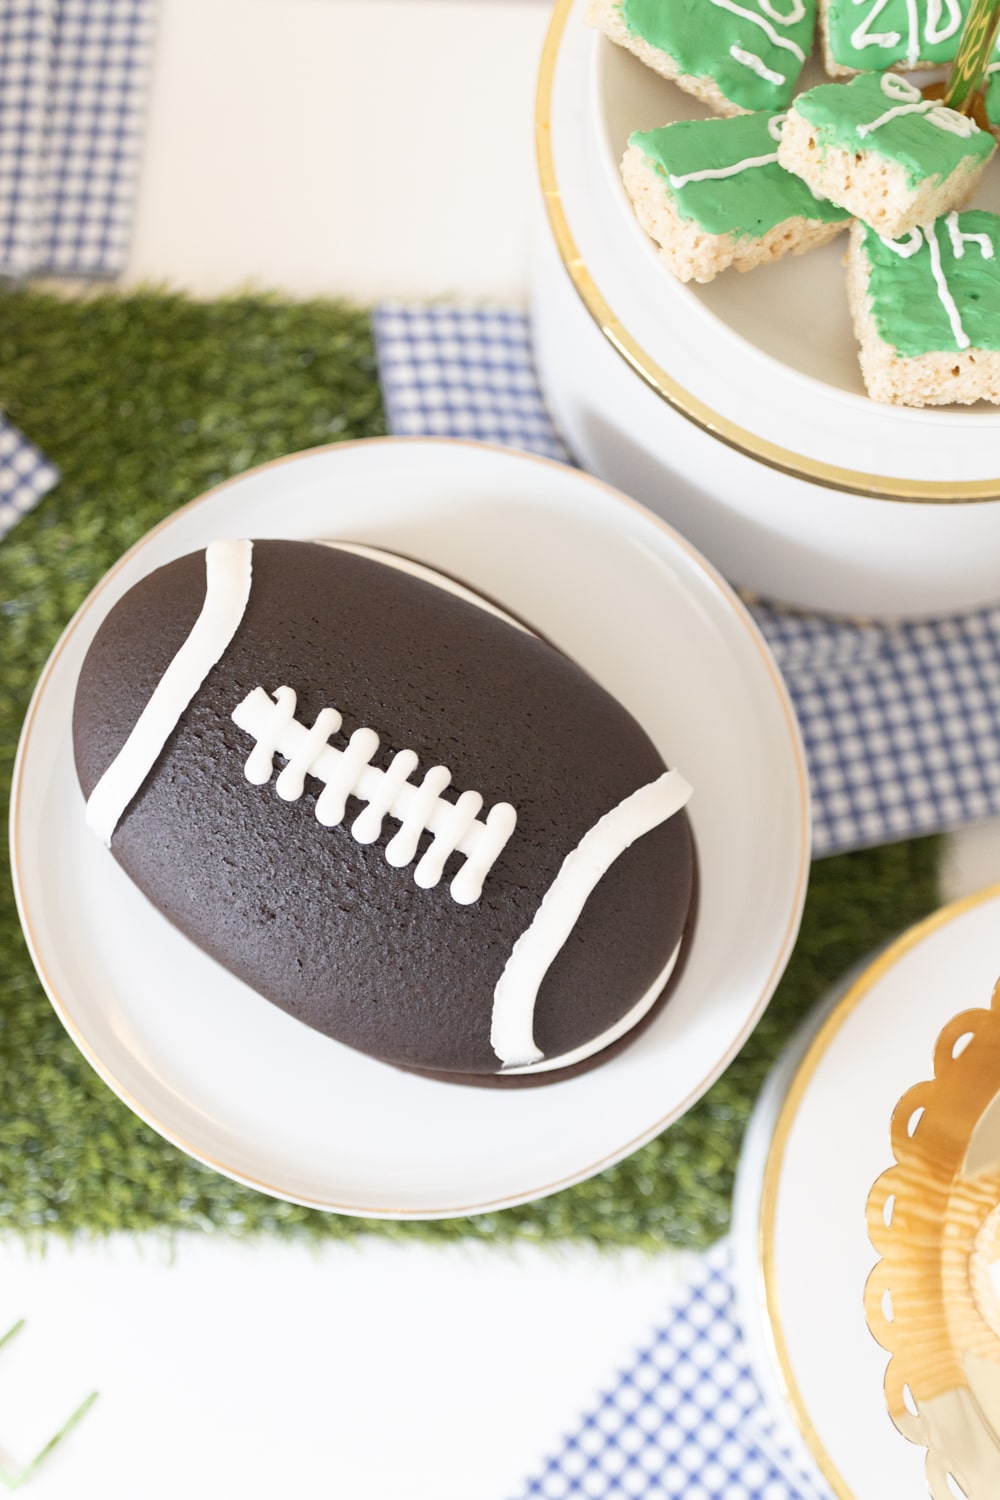 Hy-Vee football whoopie pie as part of a game day dessert spread created by blogger Stephanie Ziajka on Diary of a Debutante